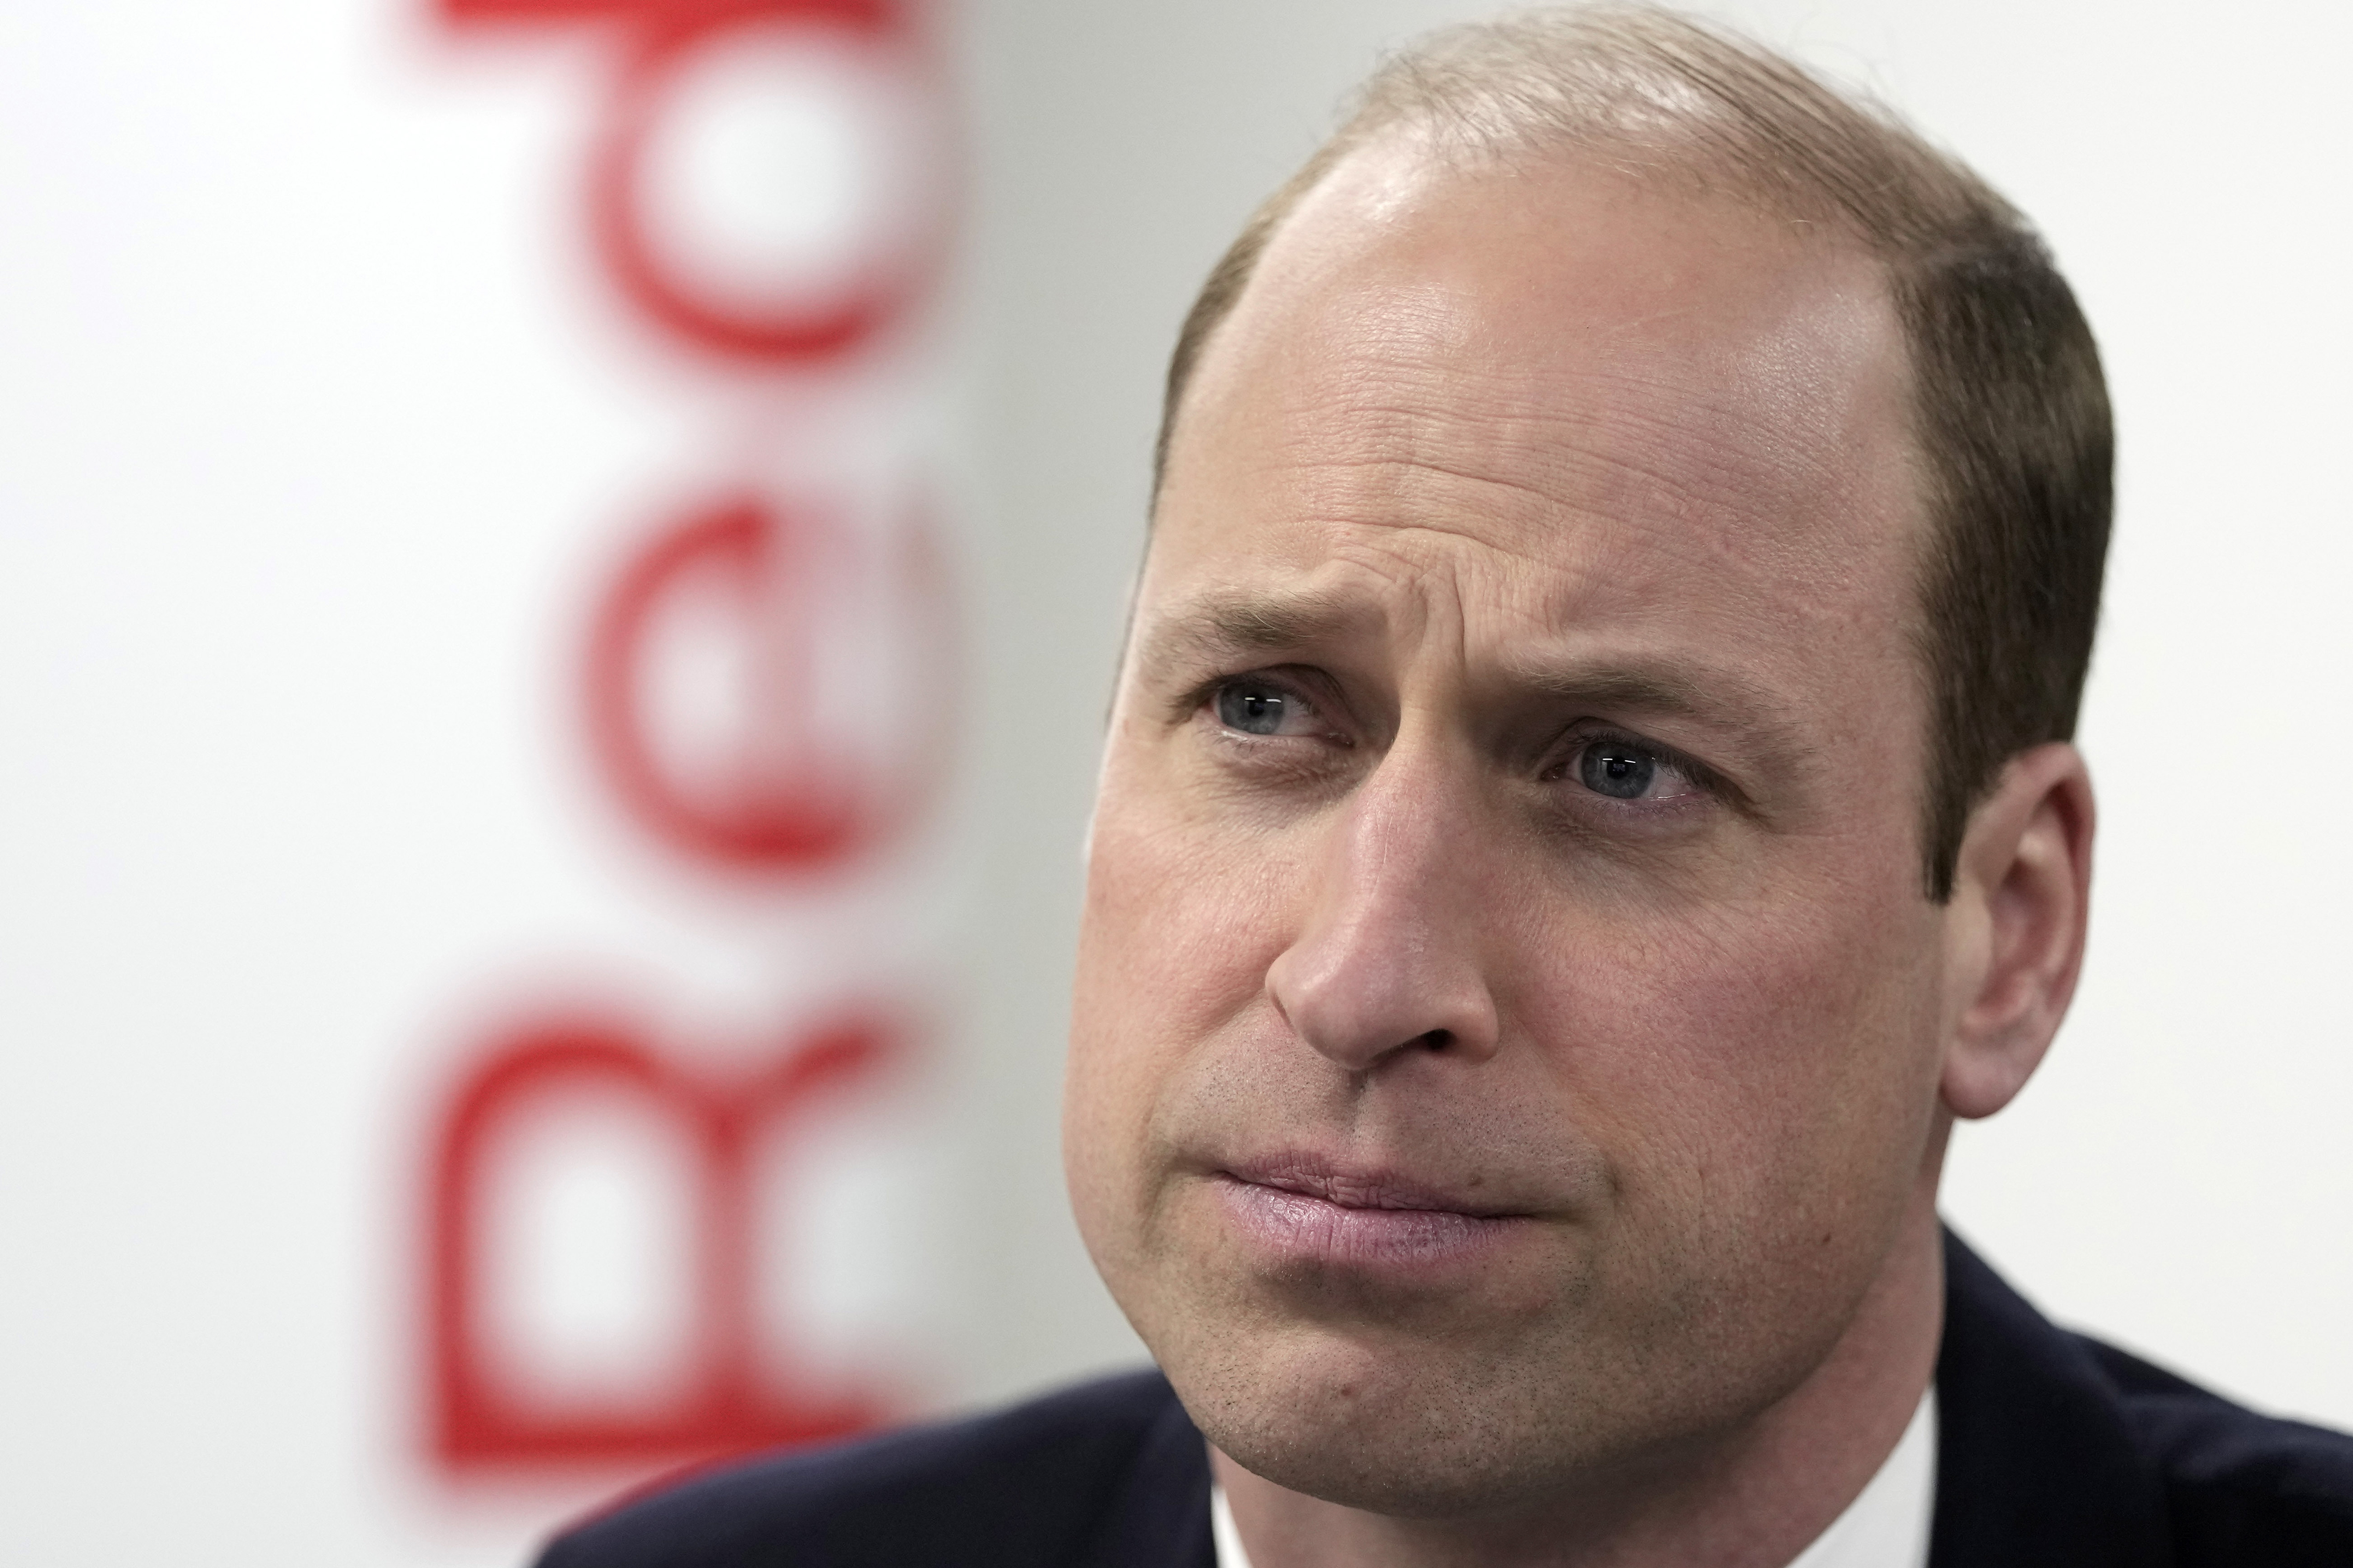 Prince William in a close-up, looking serious, with a blurred logo in the background